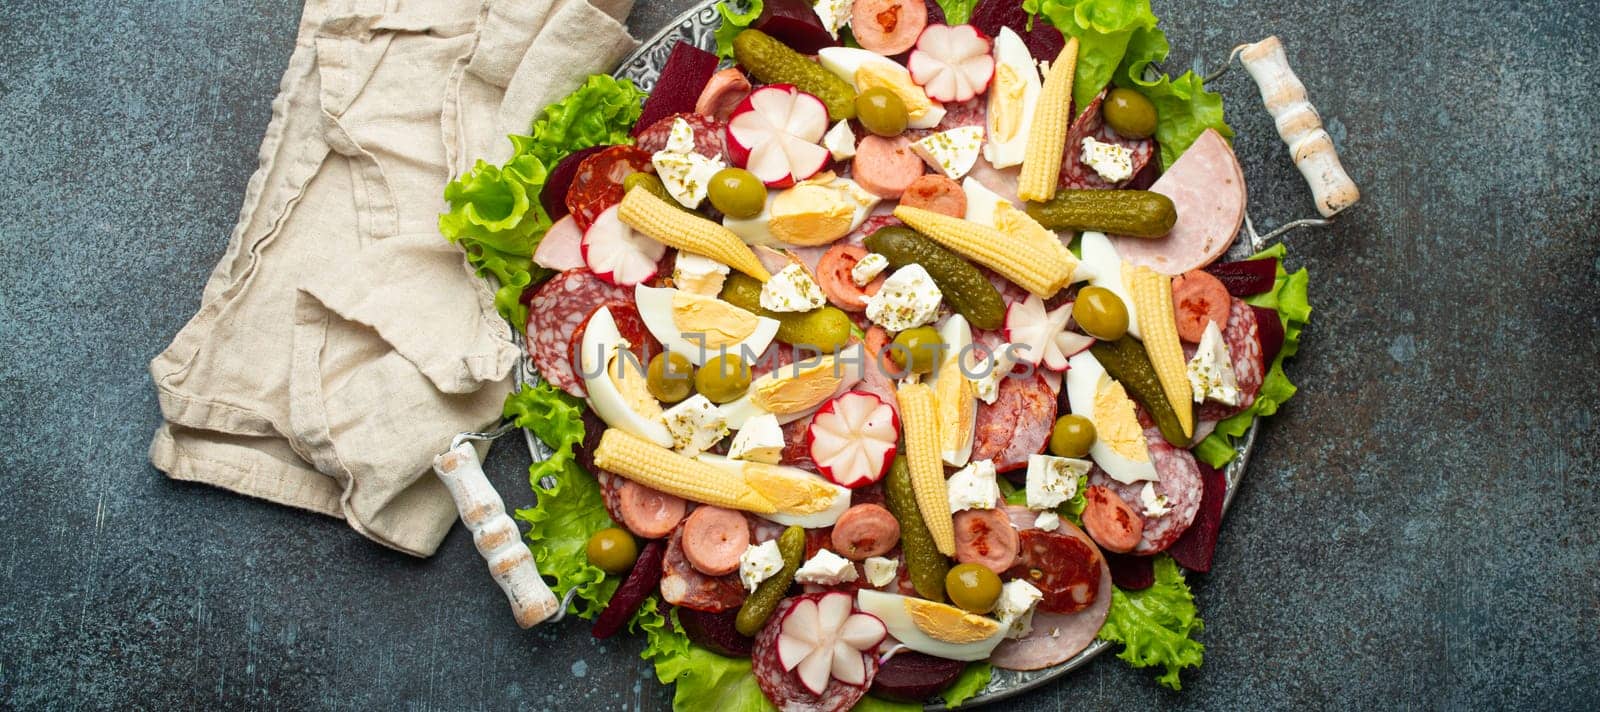 Fiambre, salad of Guatemala, Mexico and Latin America, served on large plate top view. Festive dish for All Saints Day (Day Of The Dead) celebration made of cold cuts, sausages, pickled vegetables by its_al_dente